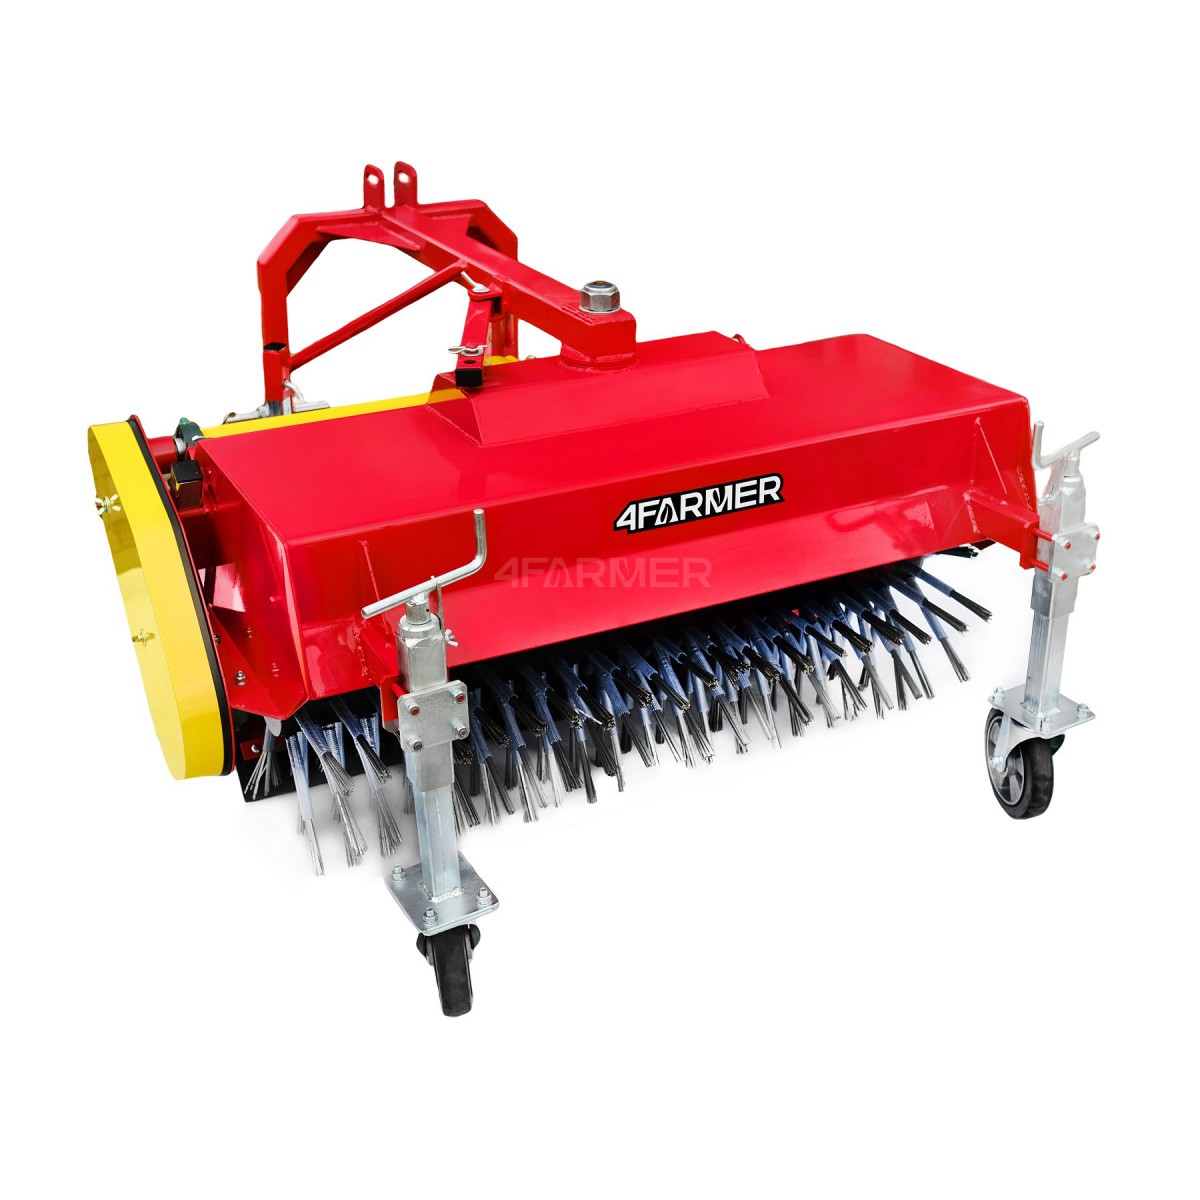 CH1200 weeder for the 4FARMER tractor with basket